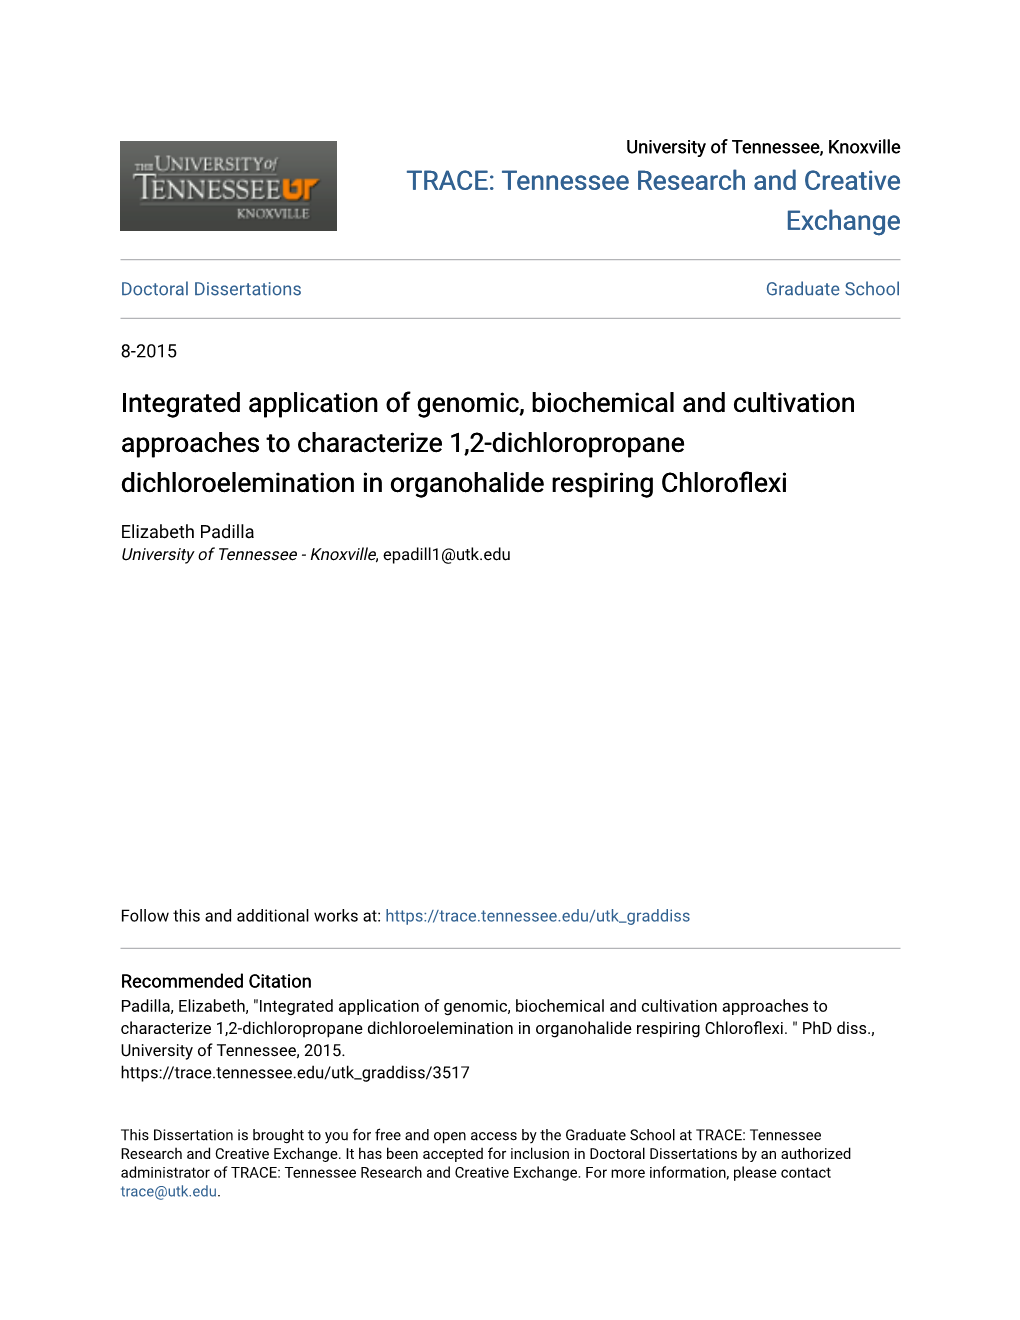 Integrated Application of Genomic, Biochemical and Cultivation